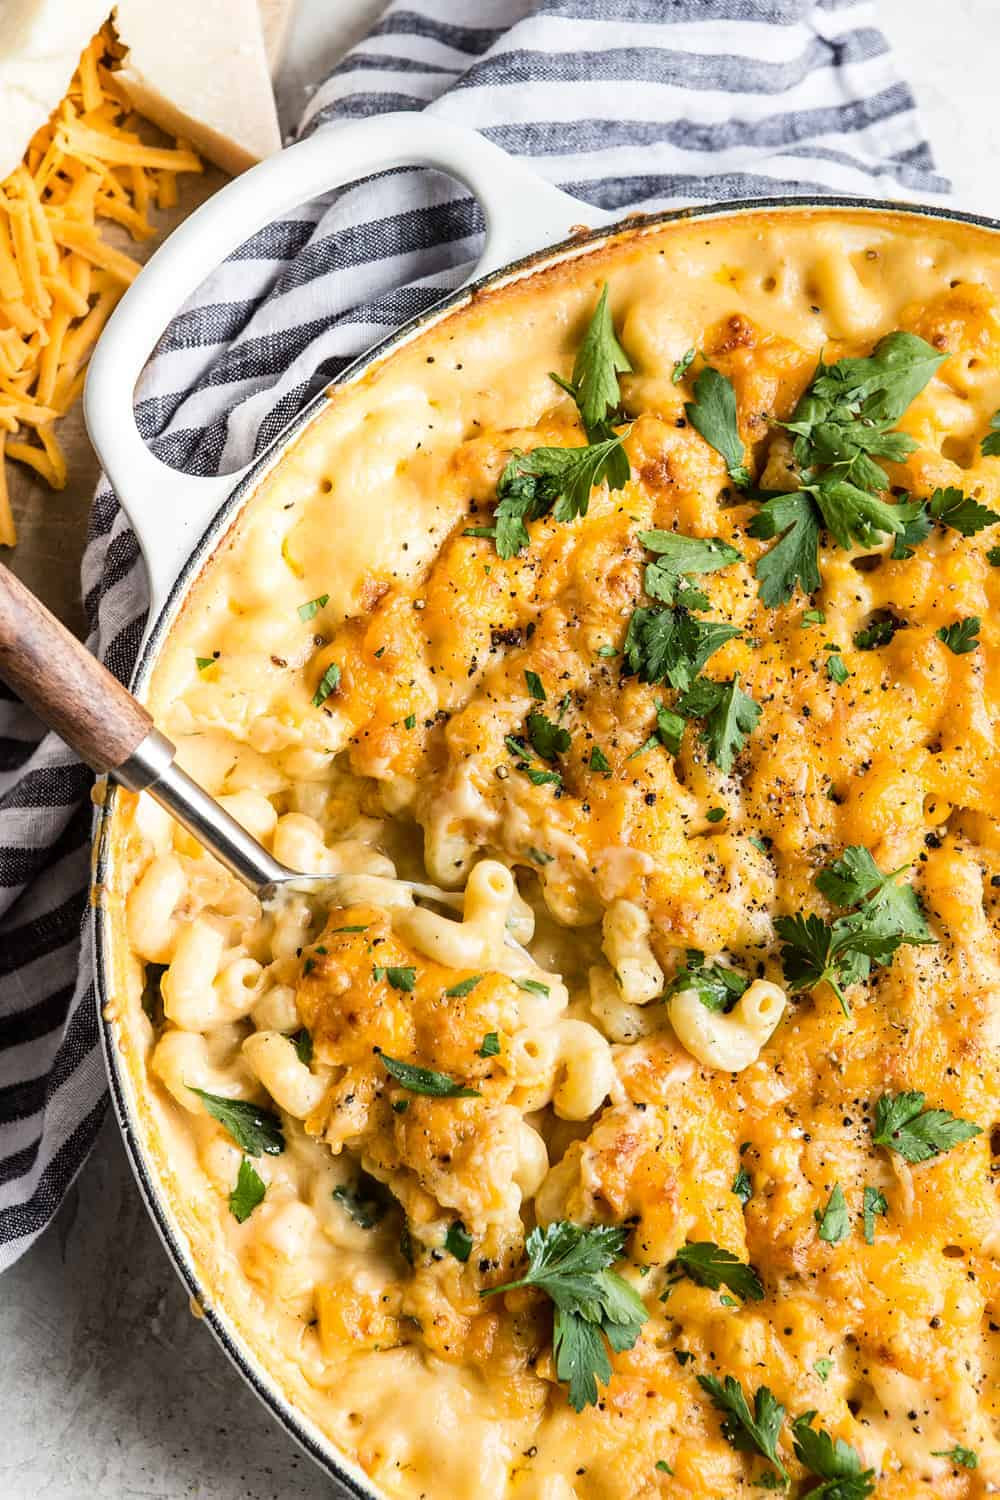 Healthy Baked Macaroni And Cheese
 Baked Macaroni and Cheese